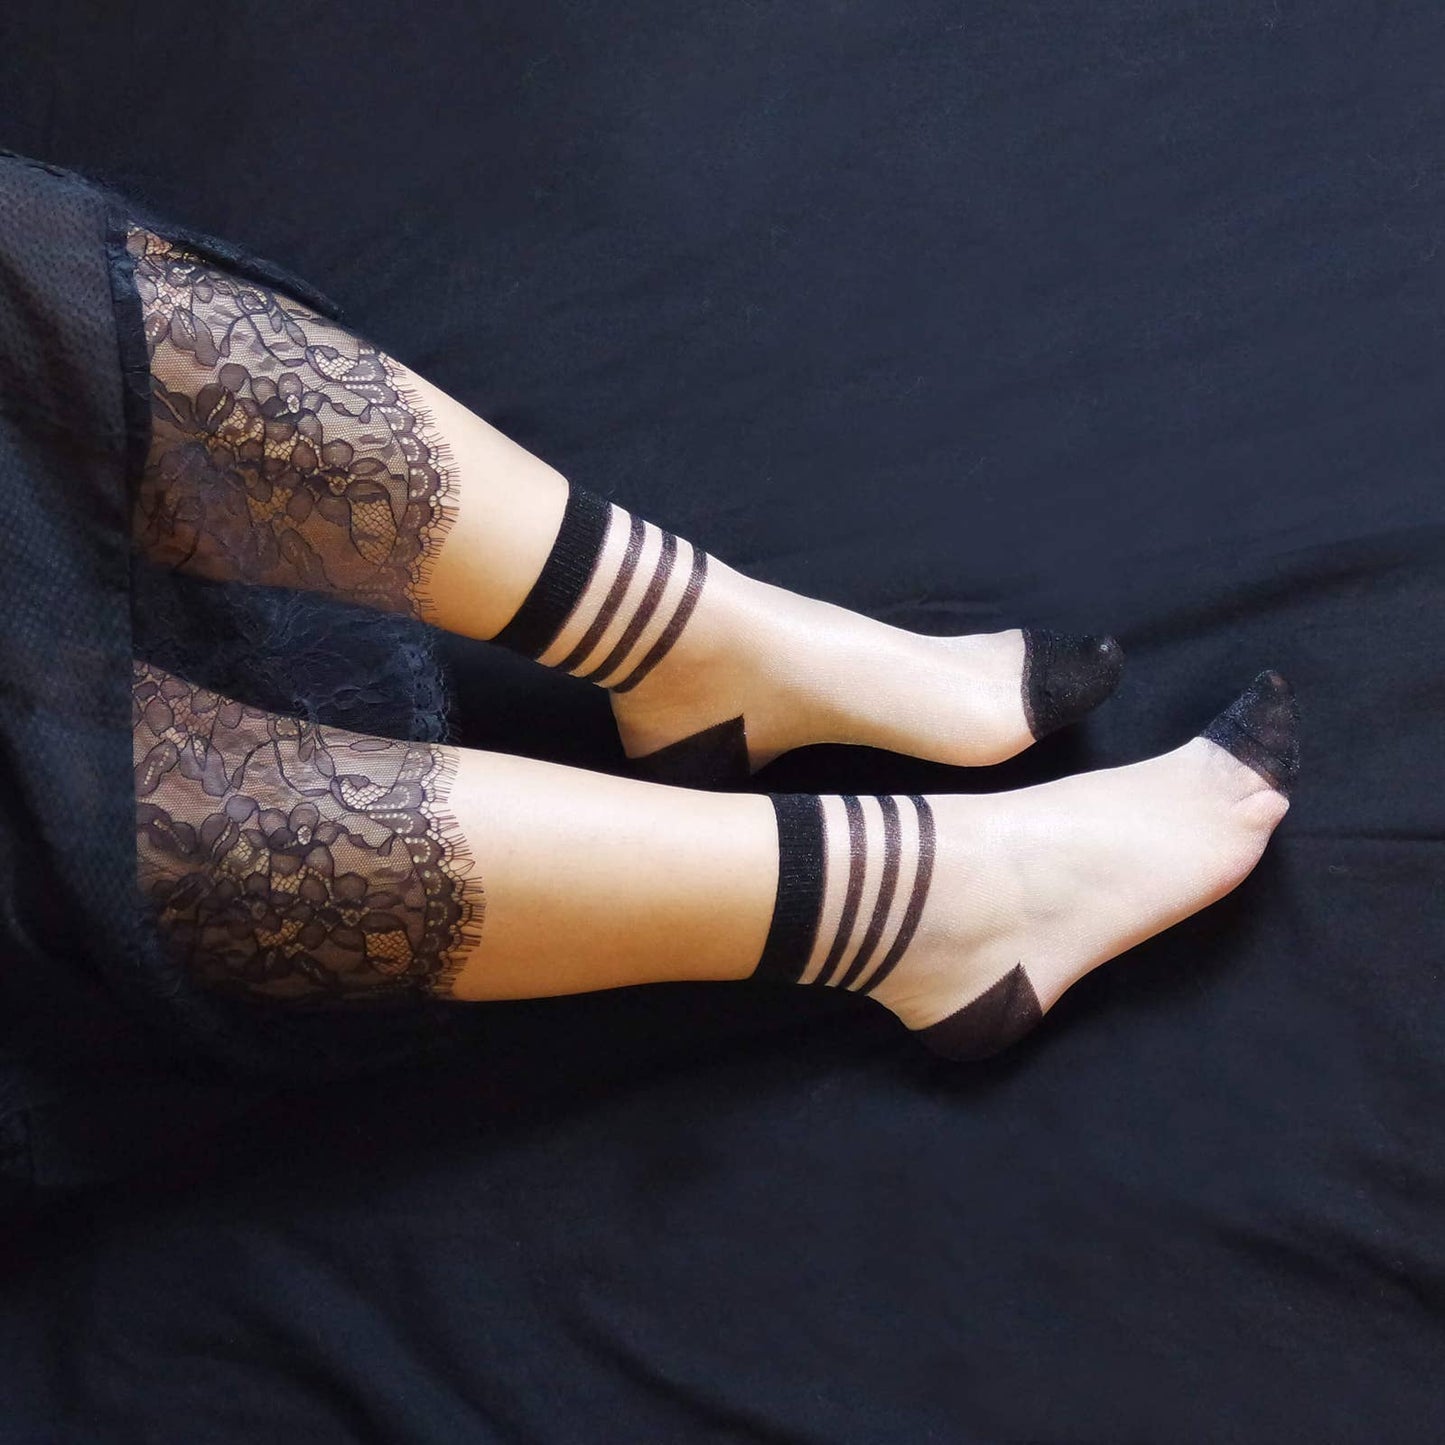 Sheer socks with black stripes, a chic and contemporary choice for women's fashion.